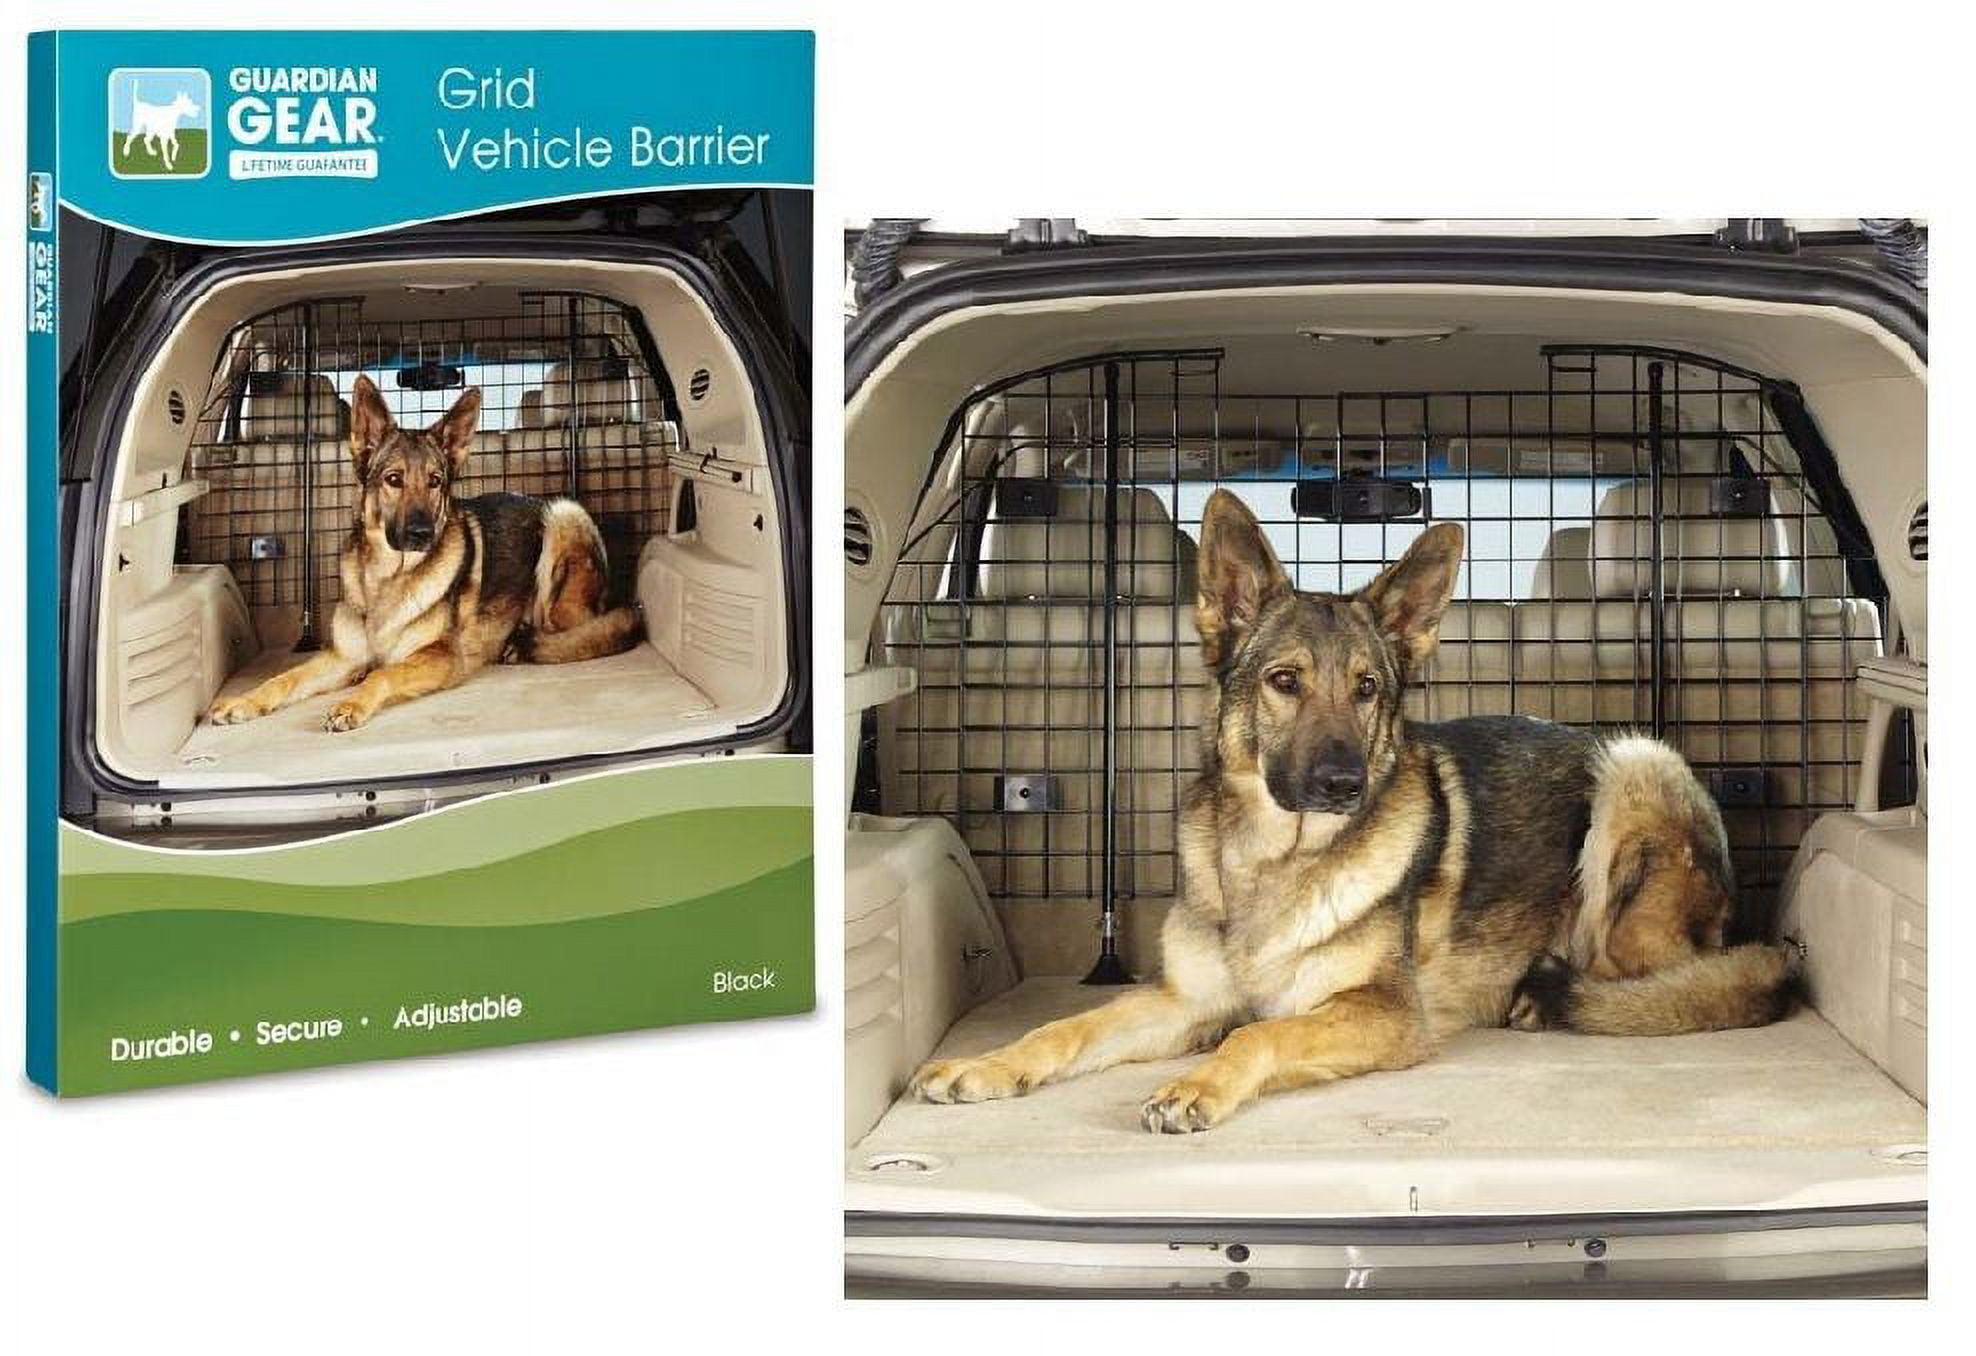 Keep Your Kids & Pets Safe On The Road - Hund Auto Netz Barriere